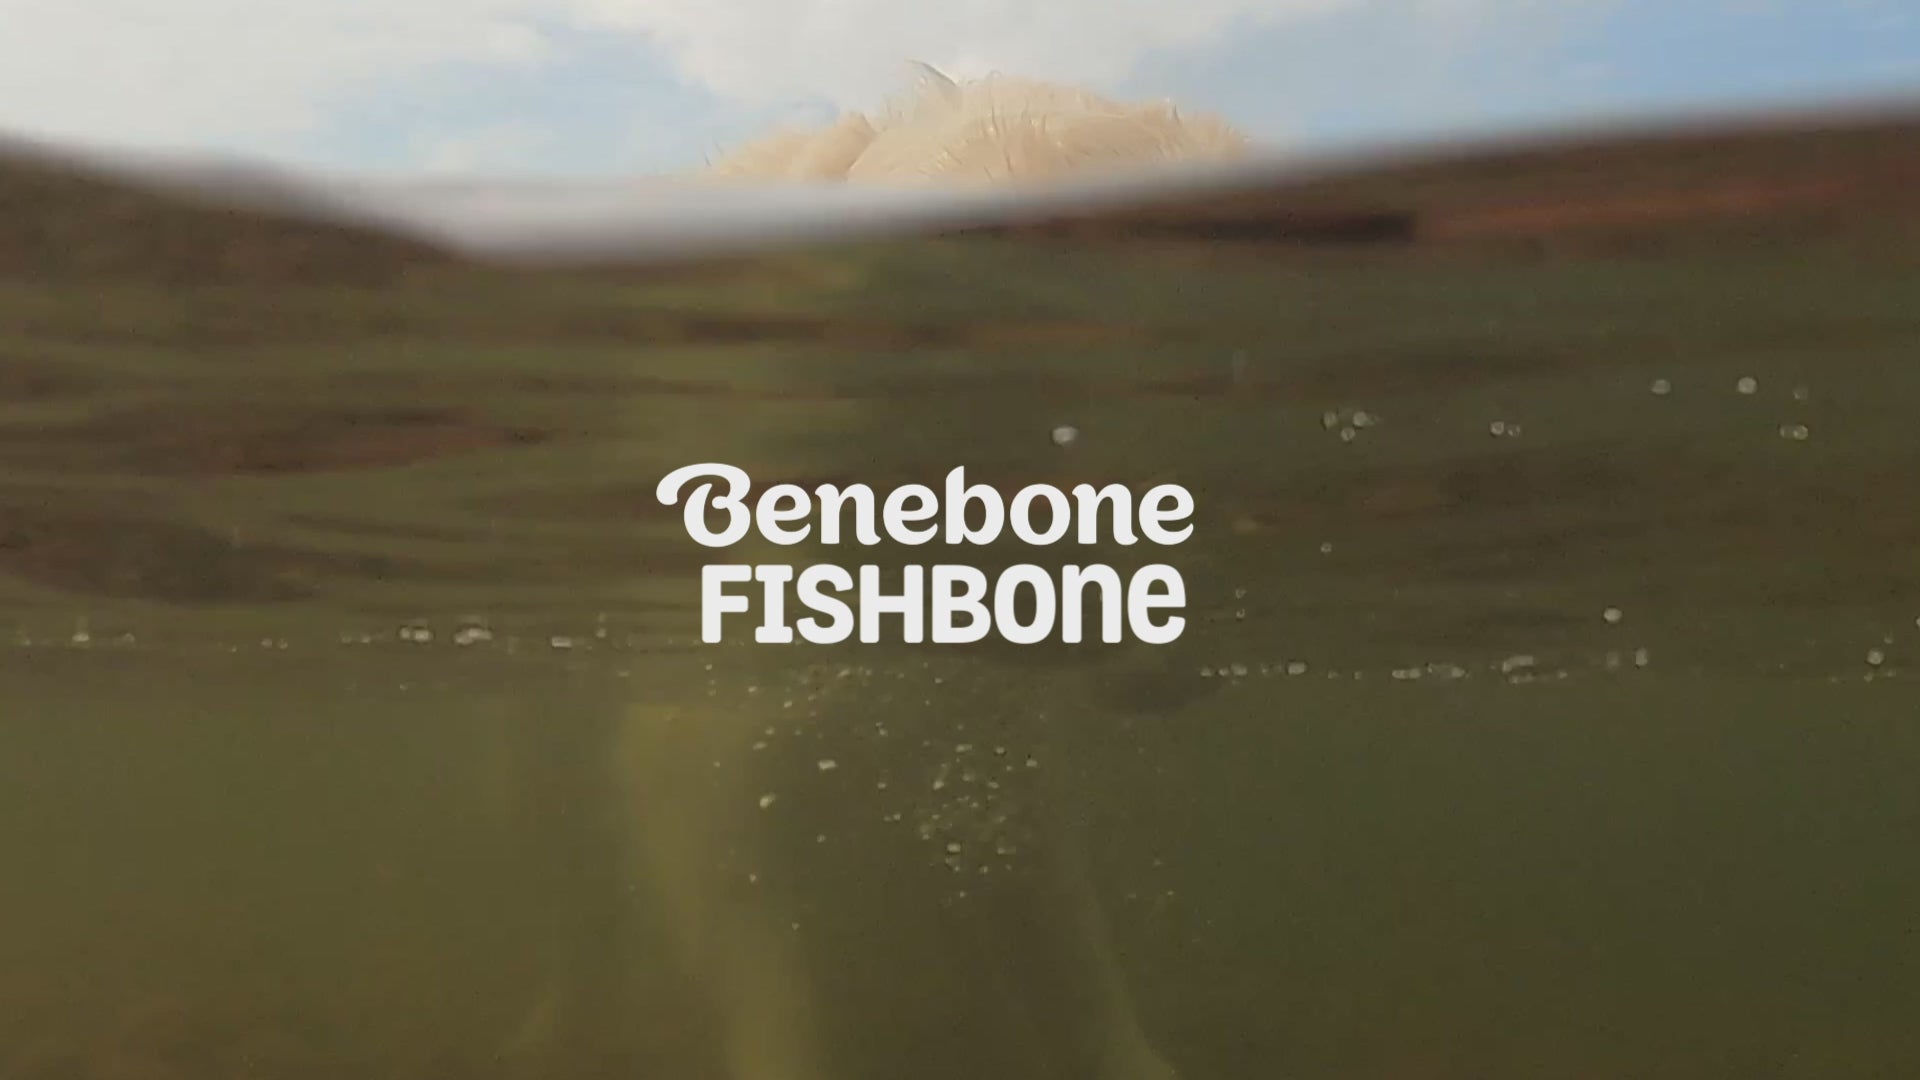 Fishbone Benebone video with music only